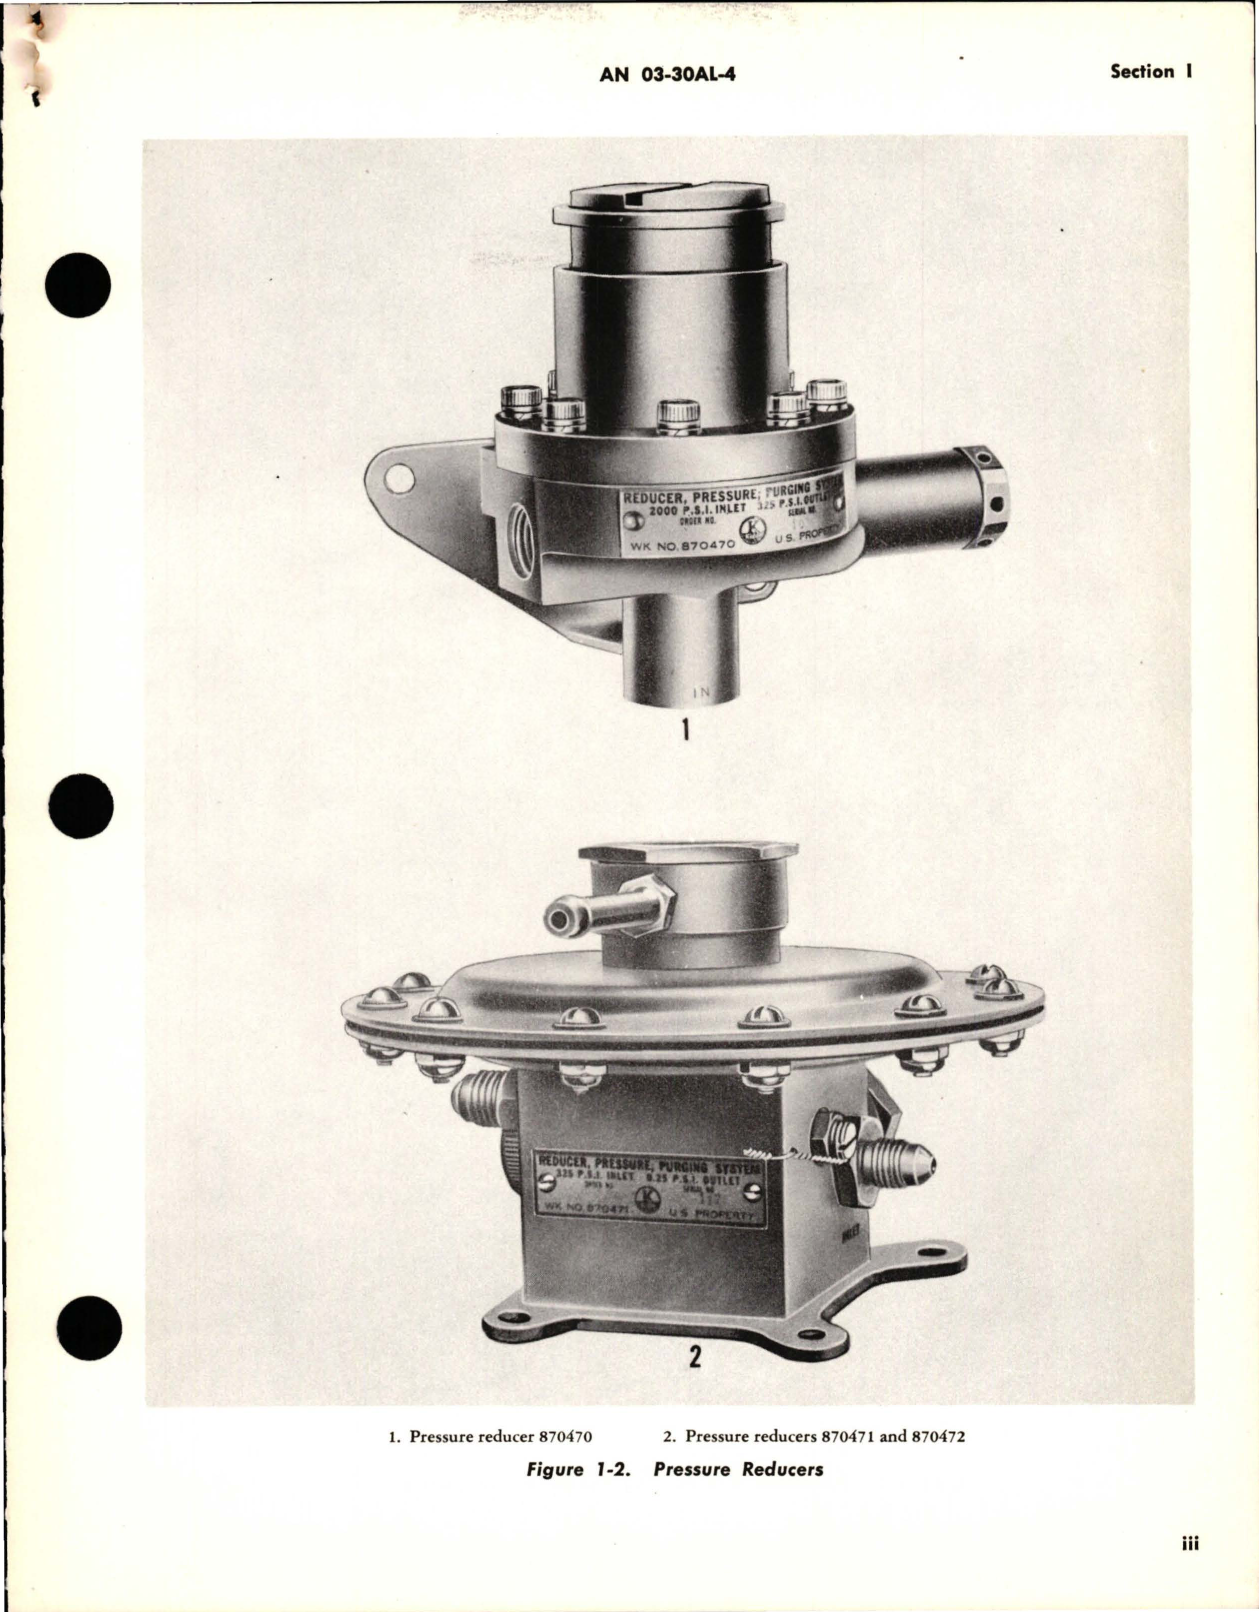 Sample page 5 from AirCorps Library document: Overhaul Instructions for Pneumatic and Purging Equipment